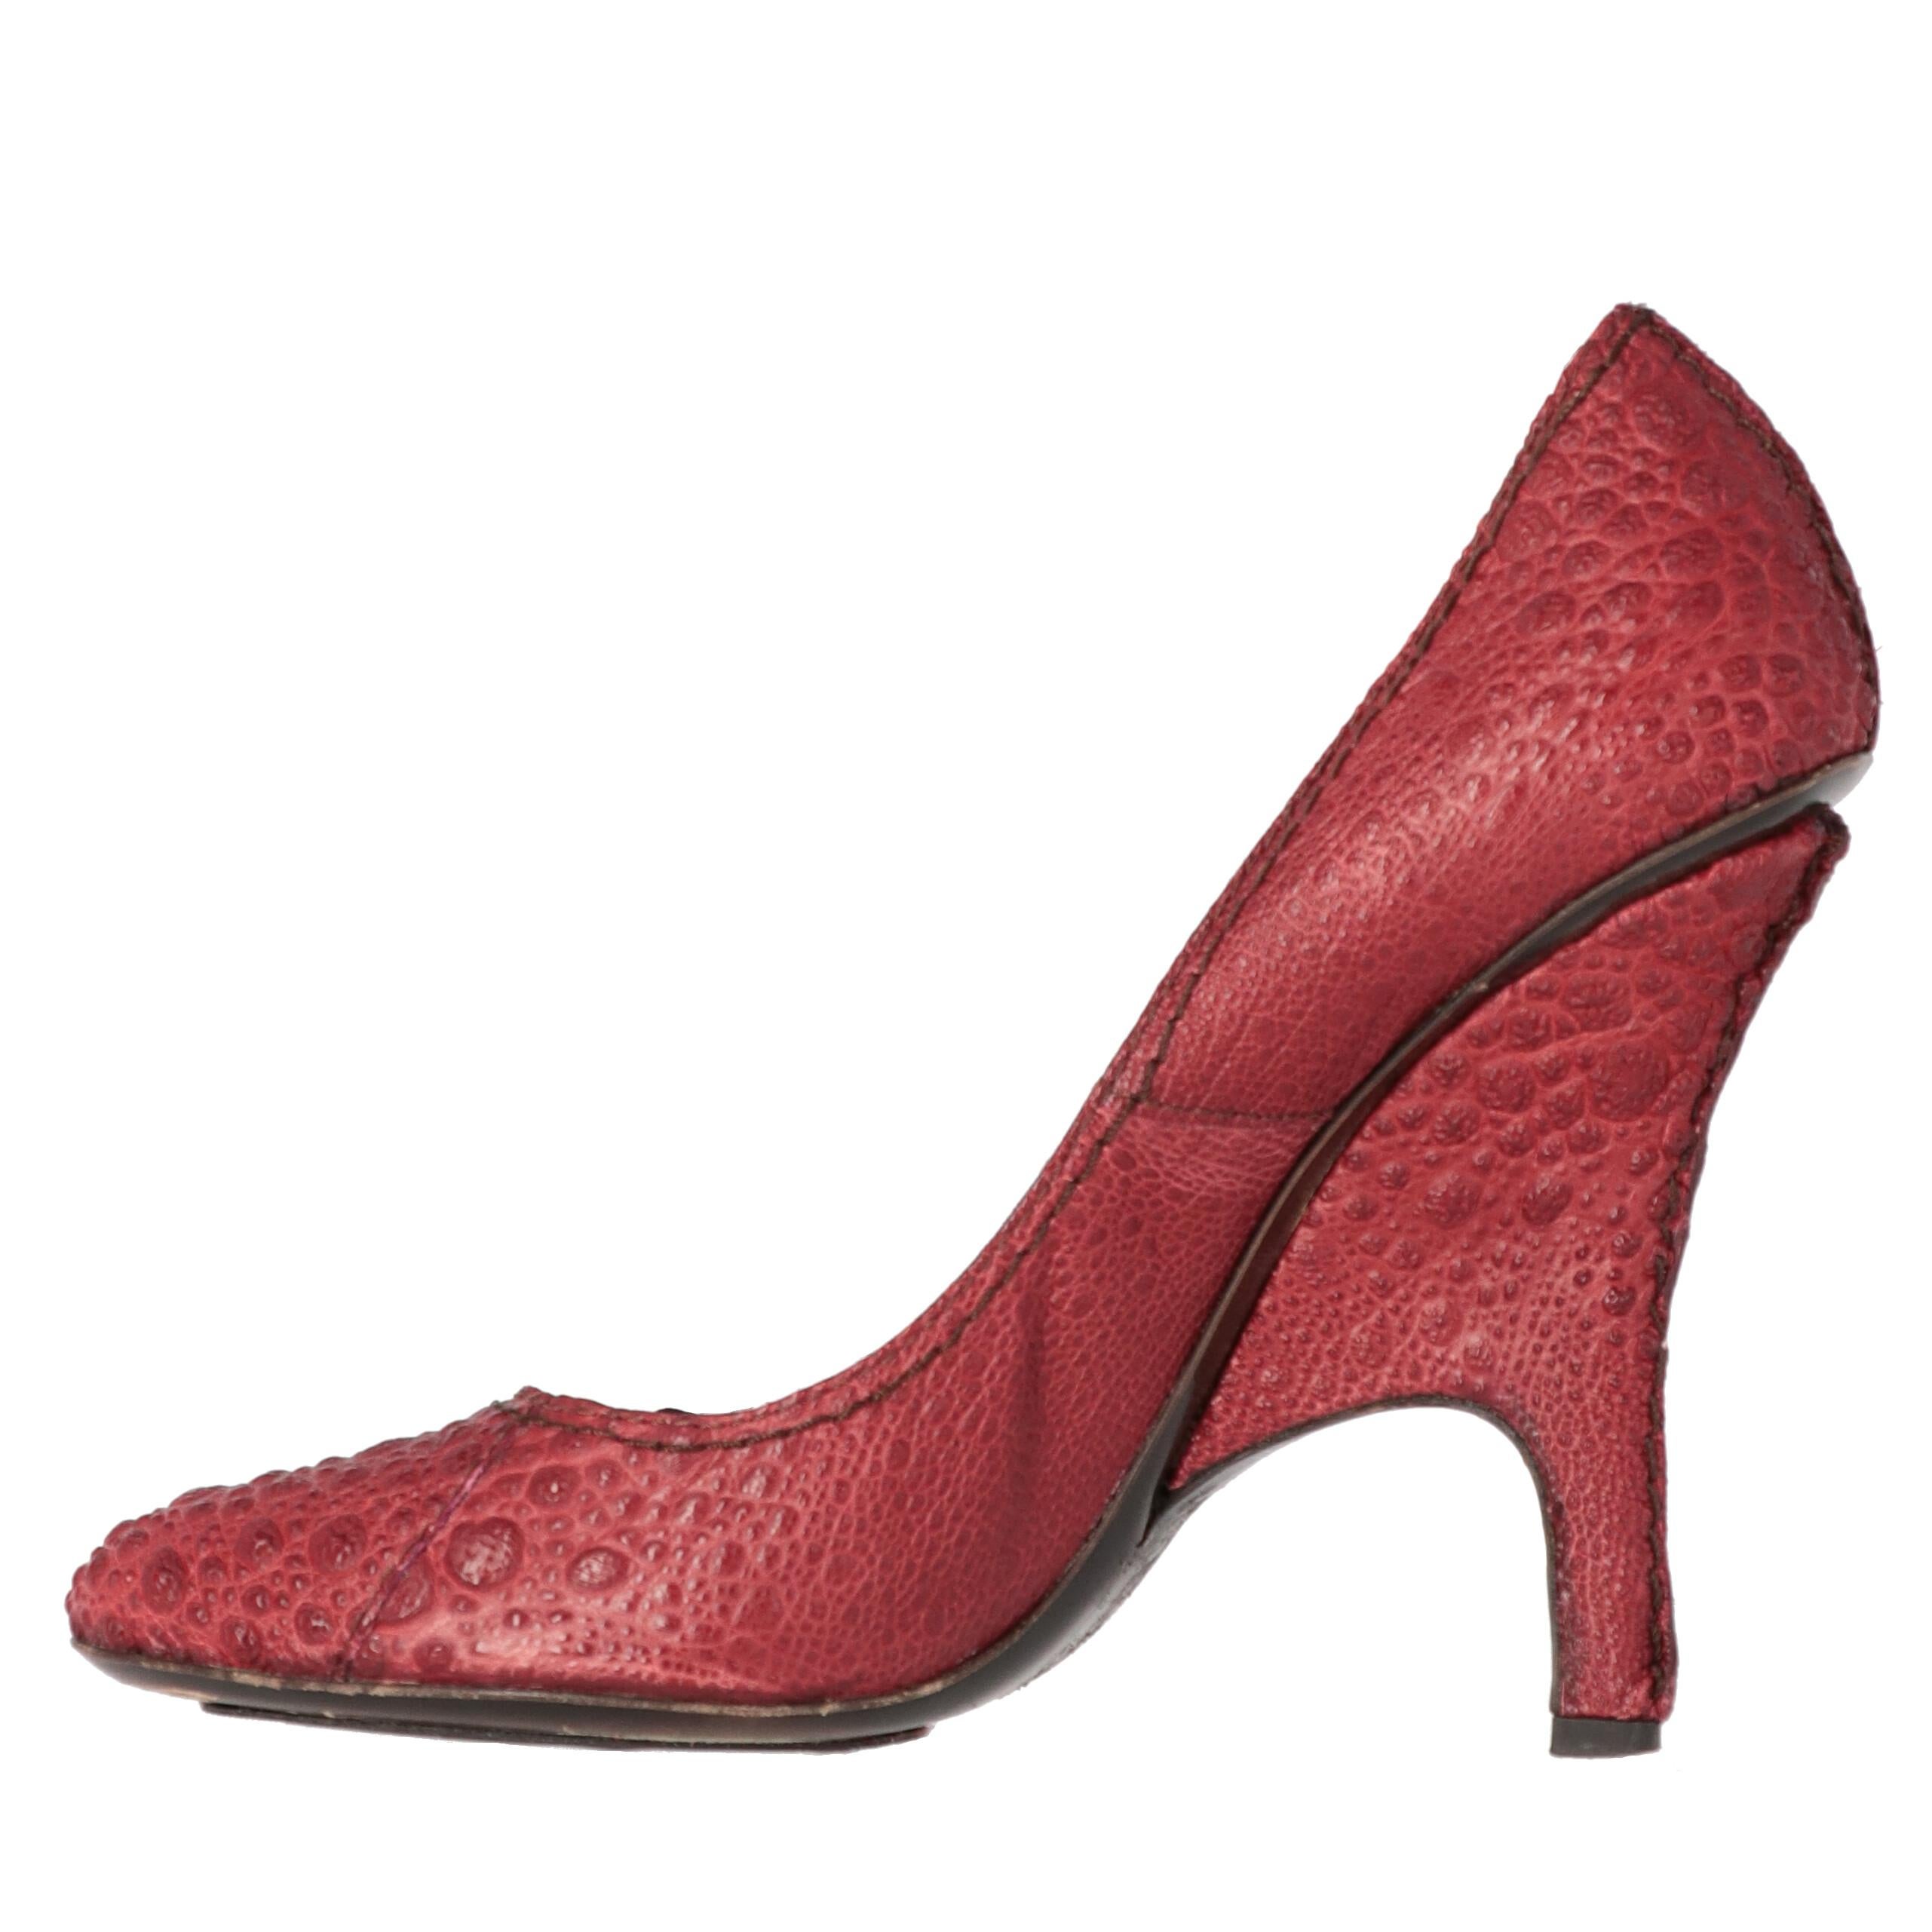 Gianfranco Ferré crocodile-effect printed red genuine leather pumps featuring an embossed texture. Sculpted heel and almond toe.

Size: 40 EU

Heel: 12 cm
Insole lenght: 26 cm

Product code: X0027

Notes: The item shows some light signs of wear on